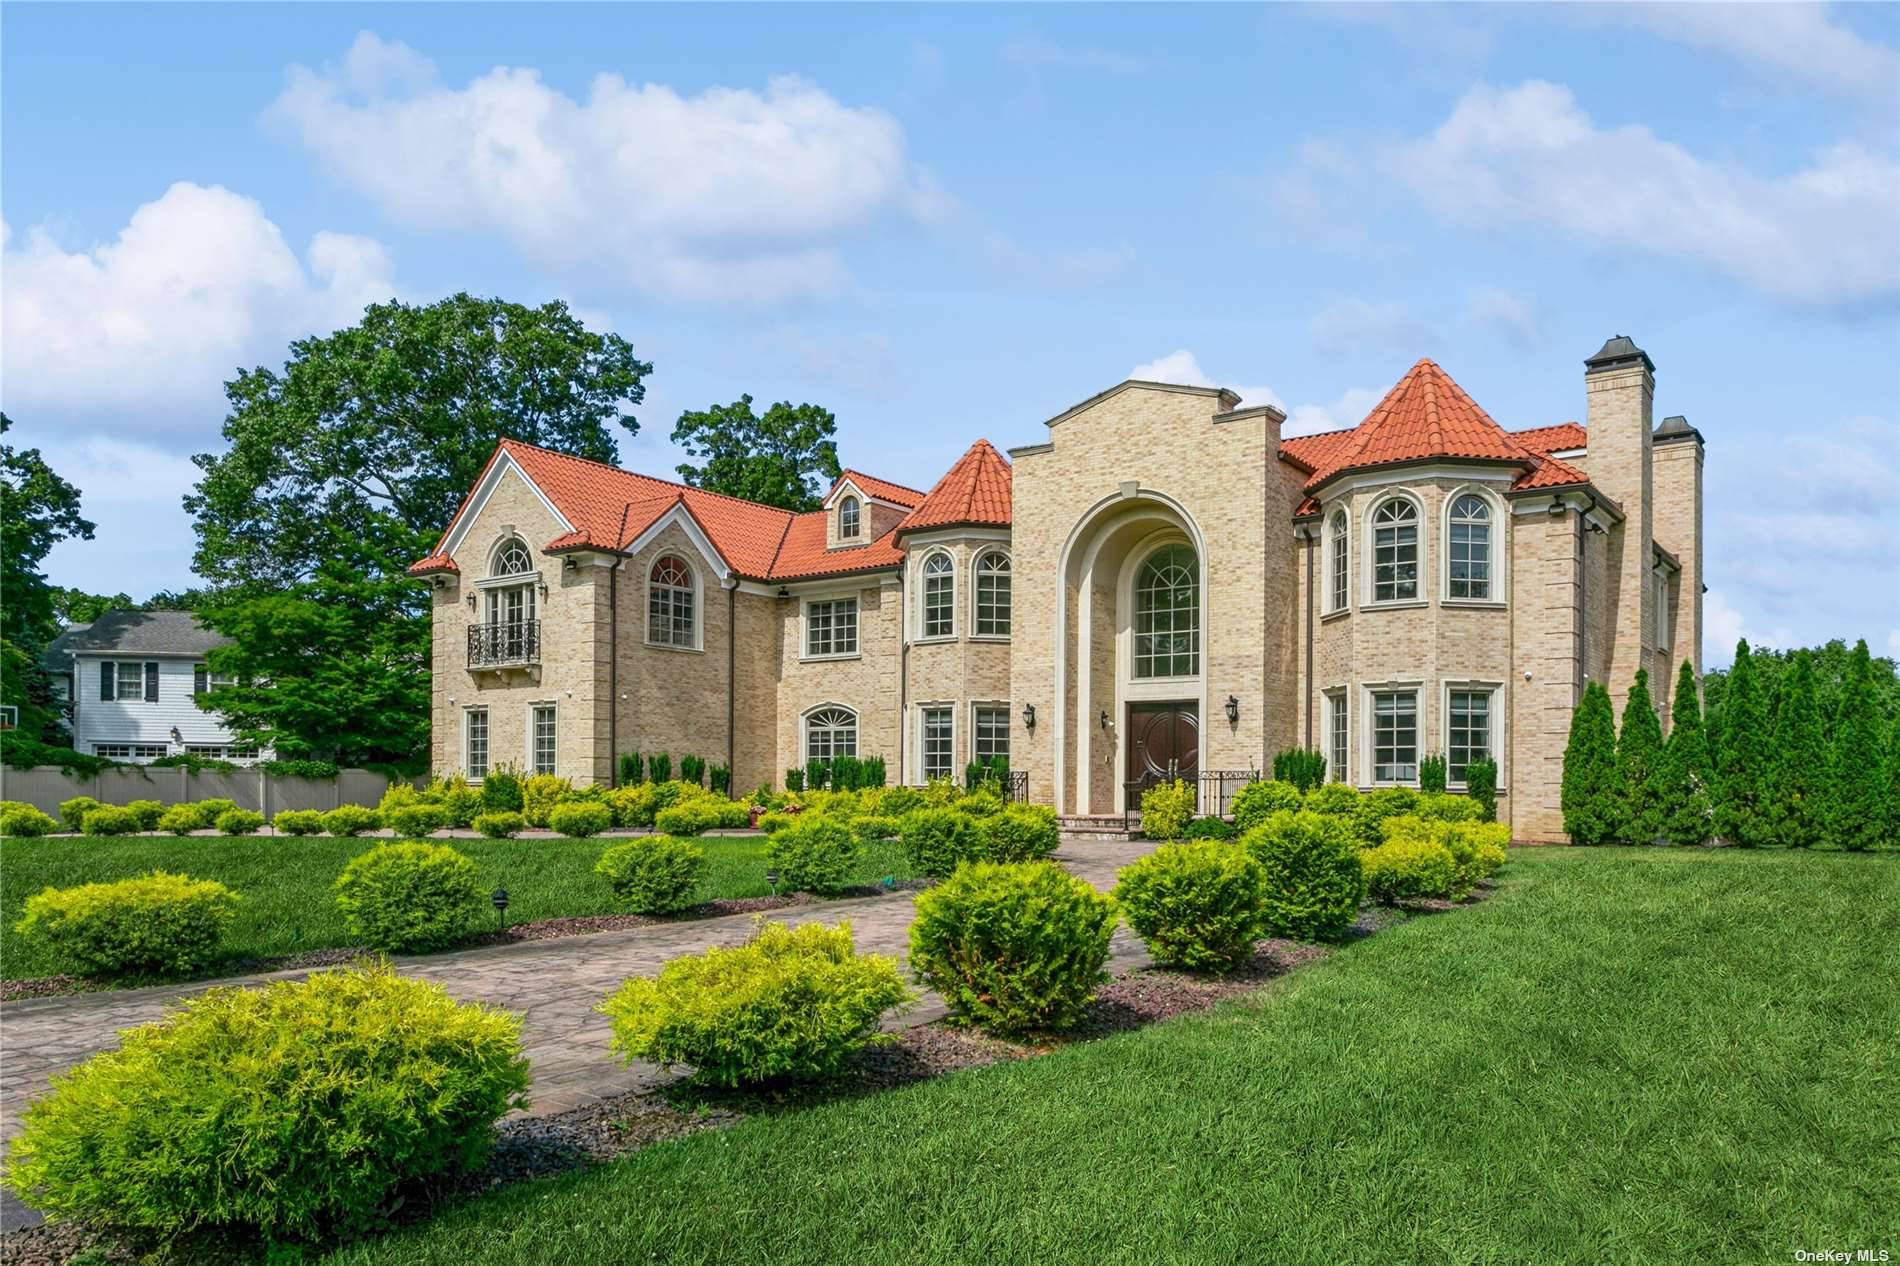 Experience the grandeur of this exquisite, newly constructed 11 bedroom contemporary colonial brick mansion totaling 14, 835 sq ft of living space spread over 4 levels in Back Lawrence, on ...